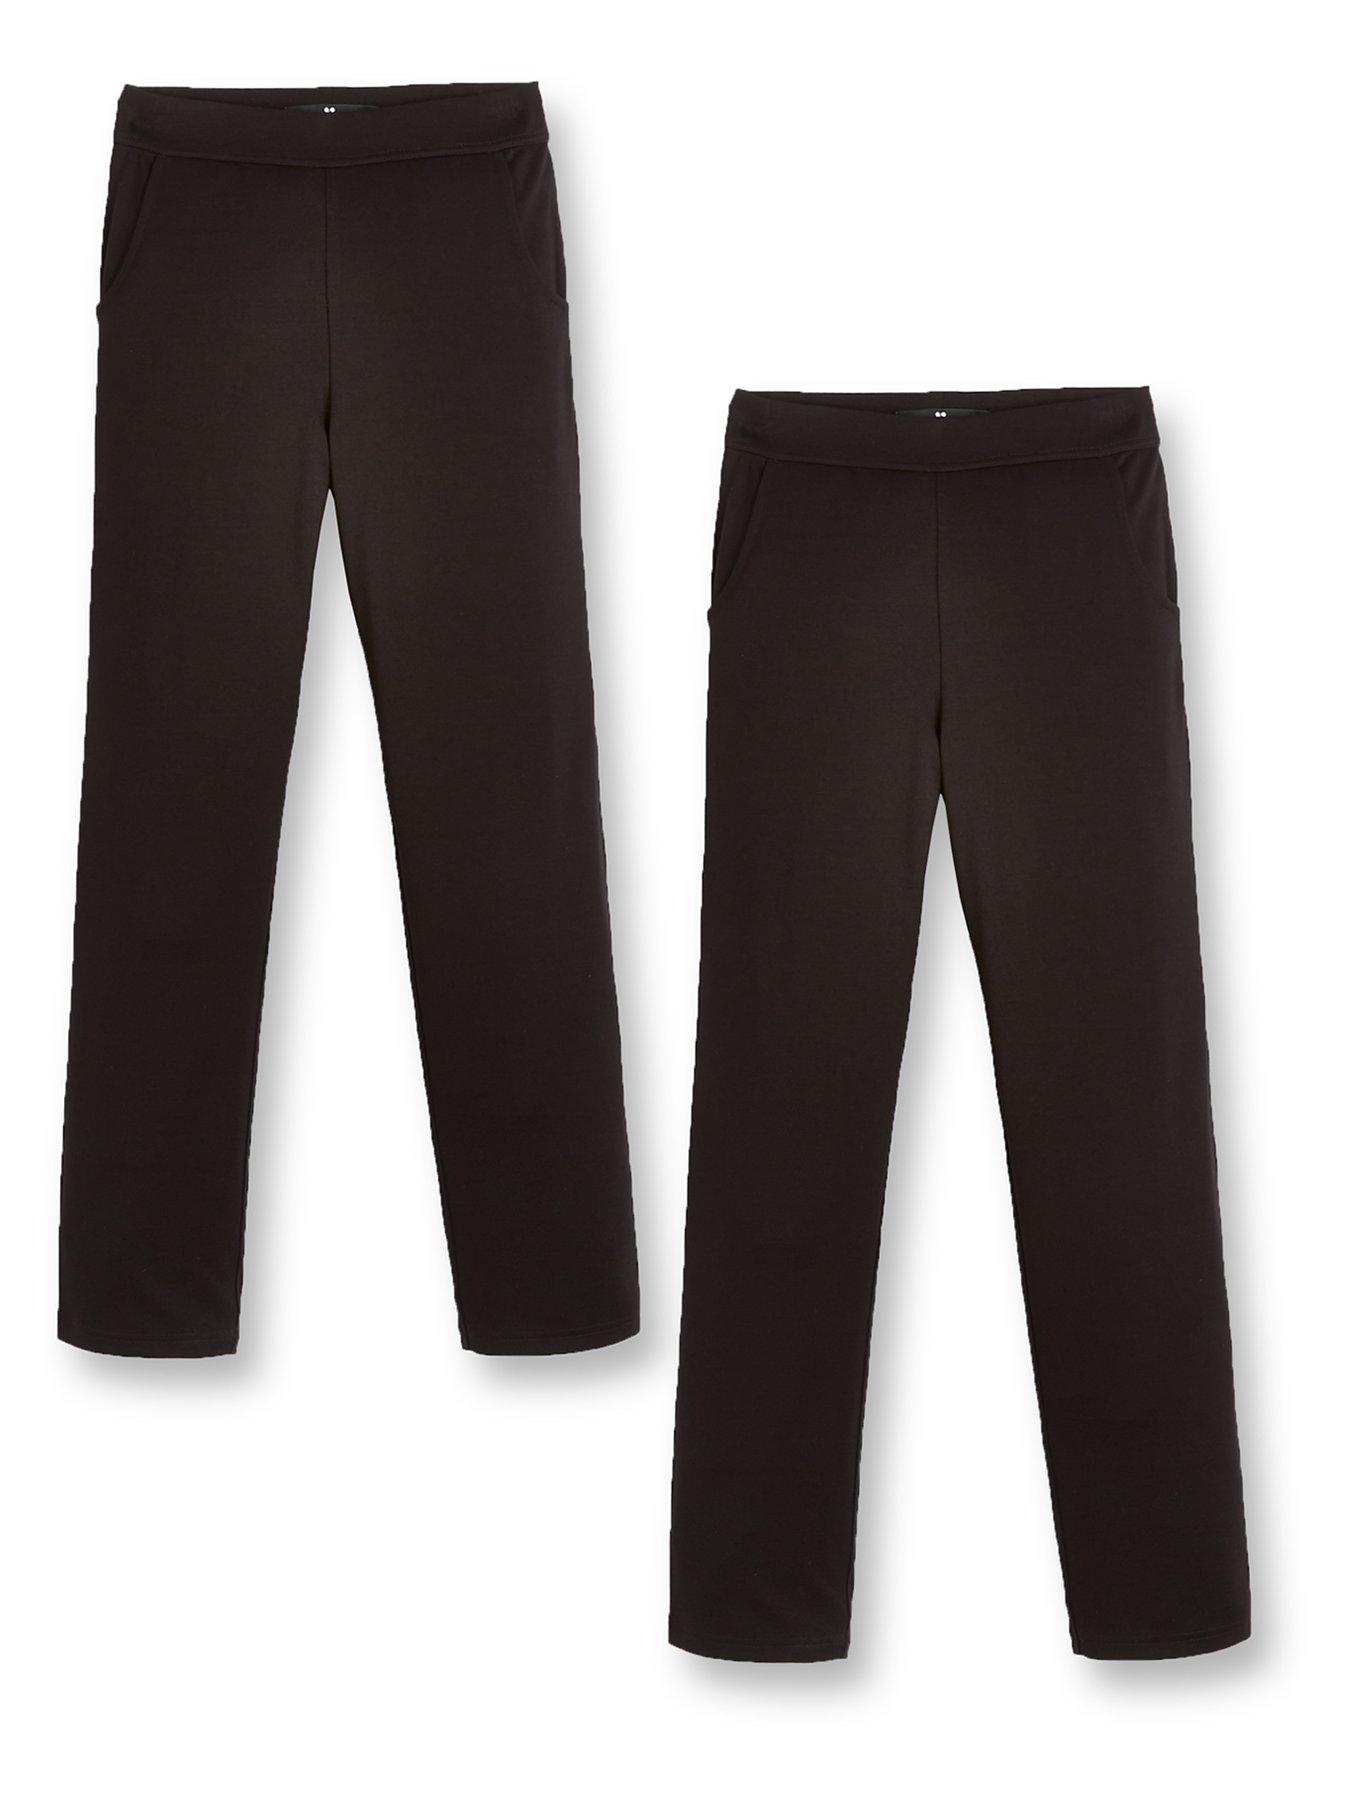 Buy Black Woven Belted School Trousers 4 years